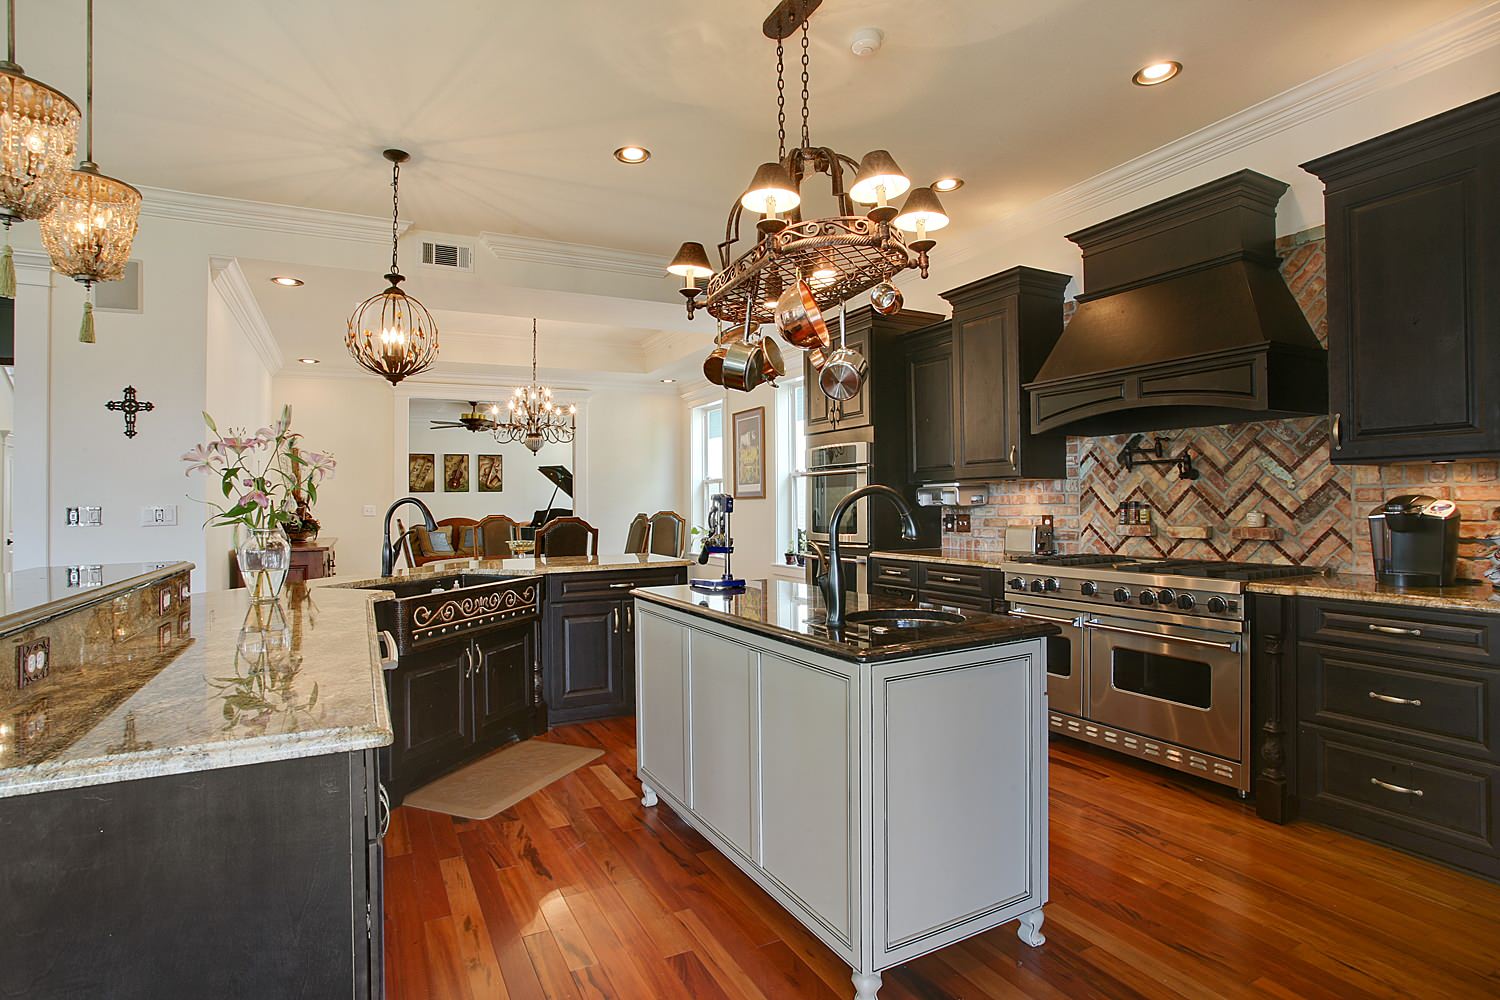 https://st.hzcdn.com/simgs/pictures/kitchens/gourmet-kitchen-vision-investment-group-nola-img~41a14bc80f75fee0_14-0667-1-a80f7e1.jpg